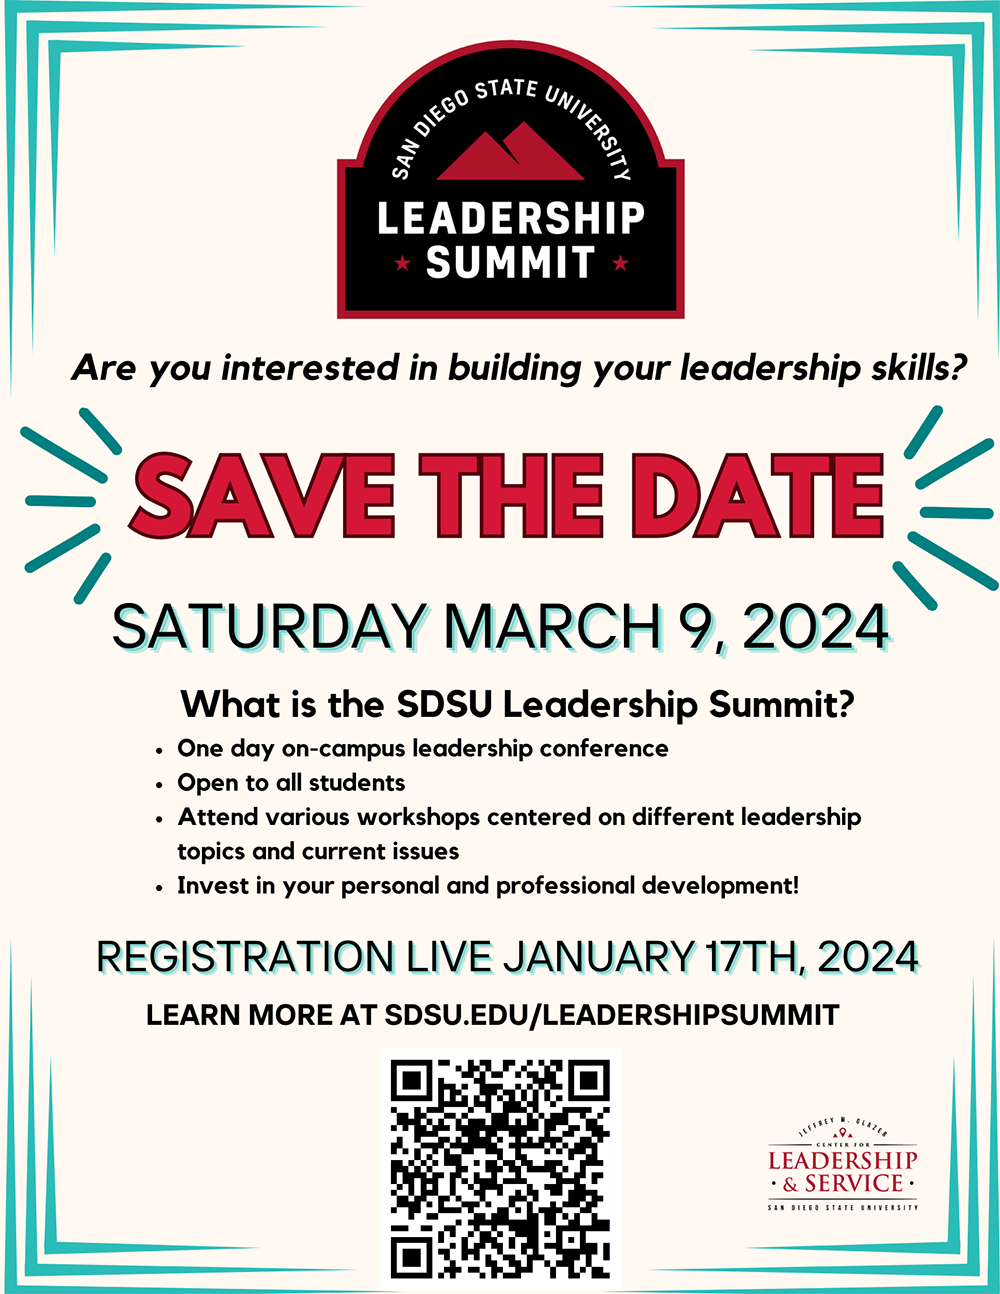 beige background with black SDSU Leadership Summit logo and red uppercase headline saying "Save the date" and event details underneath with QR code at the bottom. event date is March 9, 2024. registration live January 17, 2024. learn more at sdsu.edu/leadershipsummit